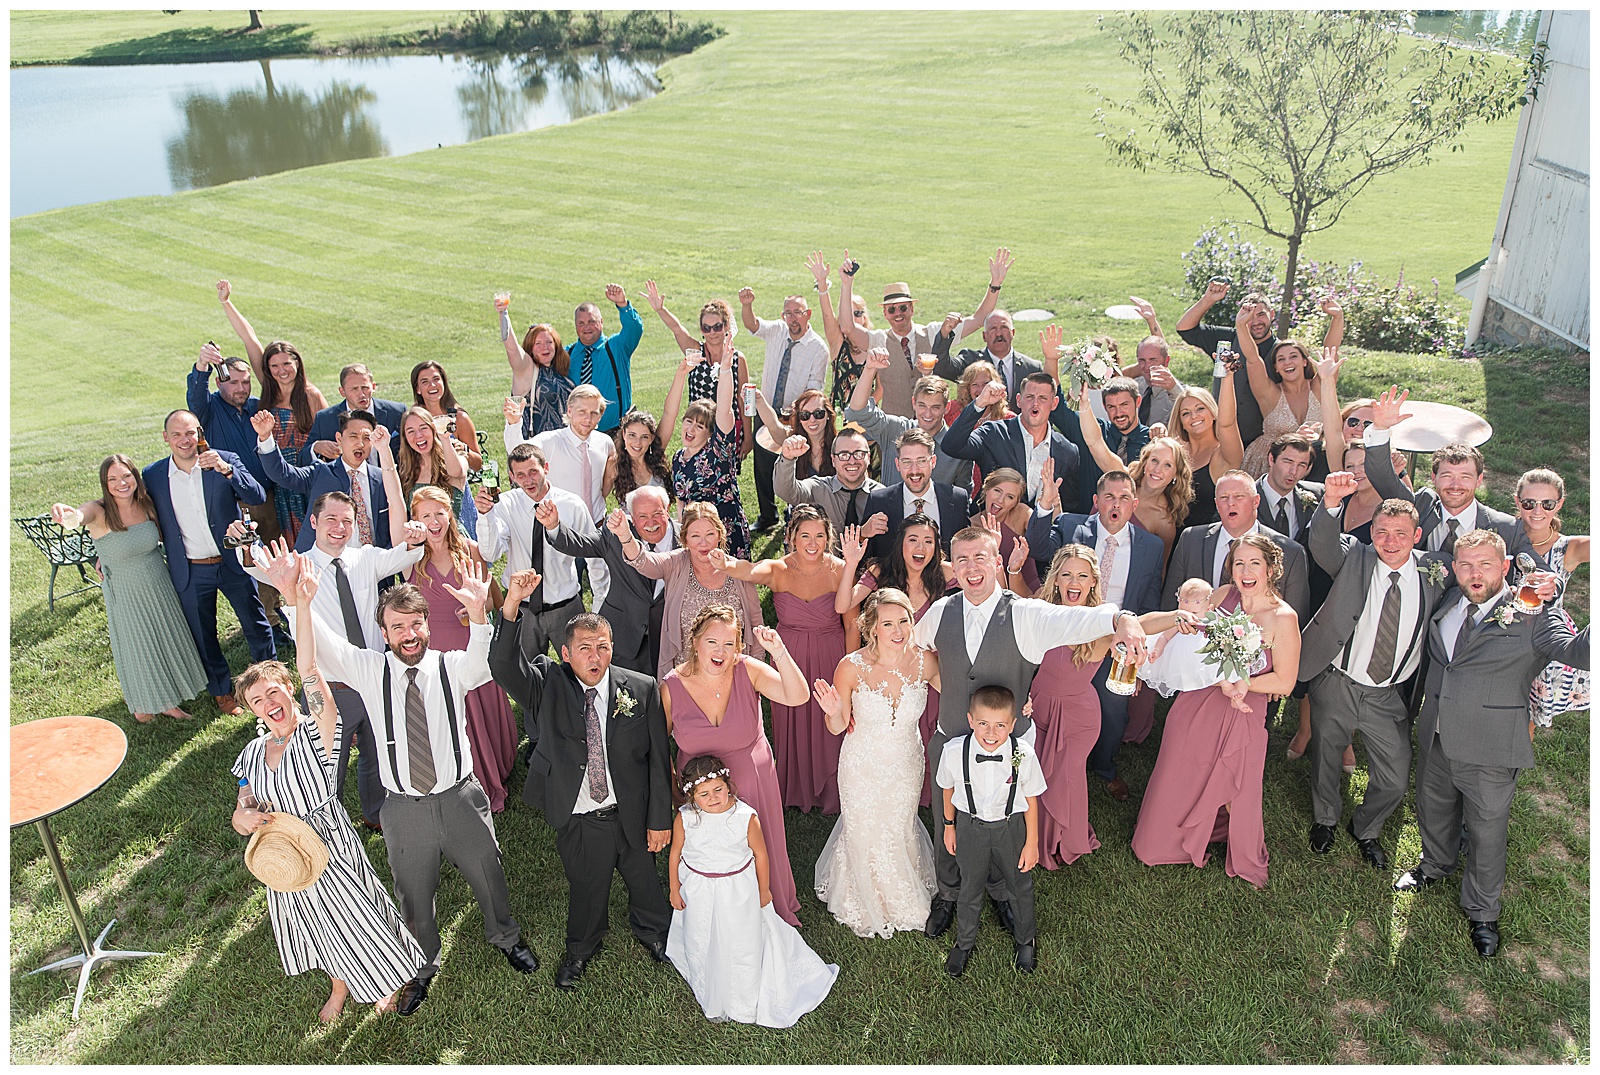 group shot of wedding couple, their bridal party, and guests outdoors in grass field with pond in the background on sunny day at Lakefield Weddings in Manheim, PA